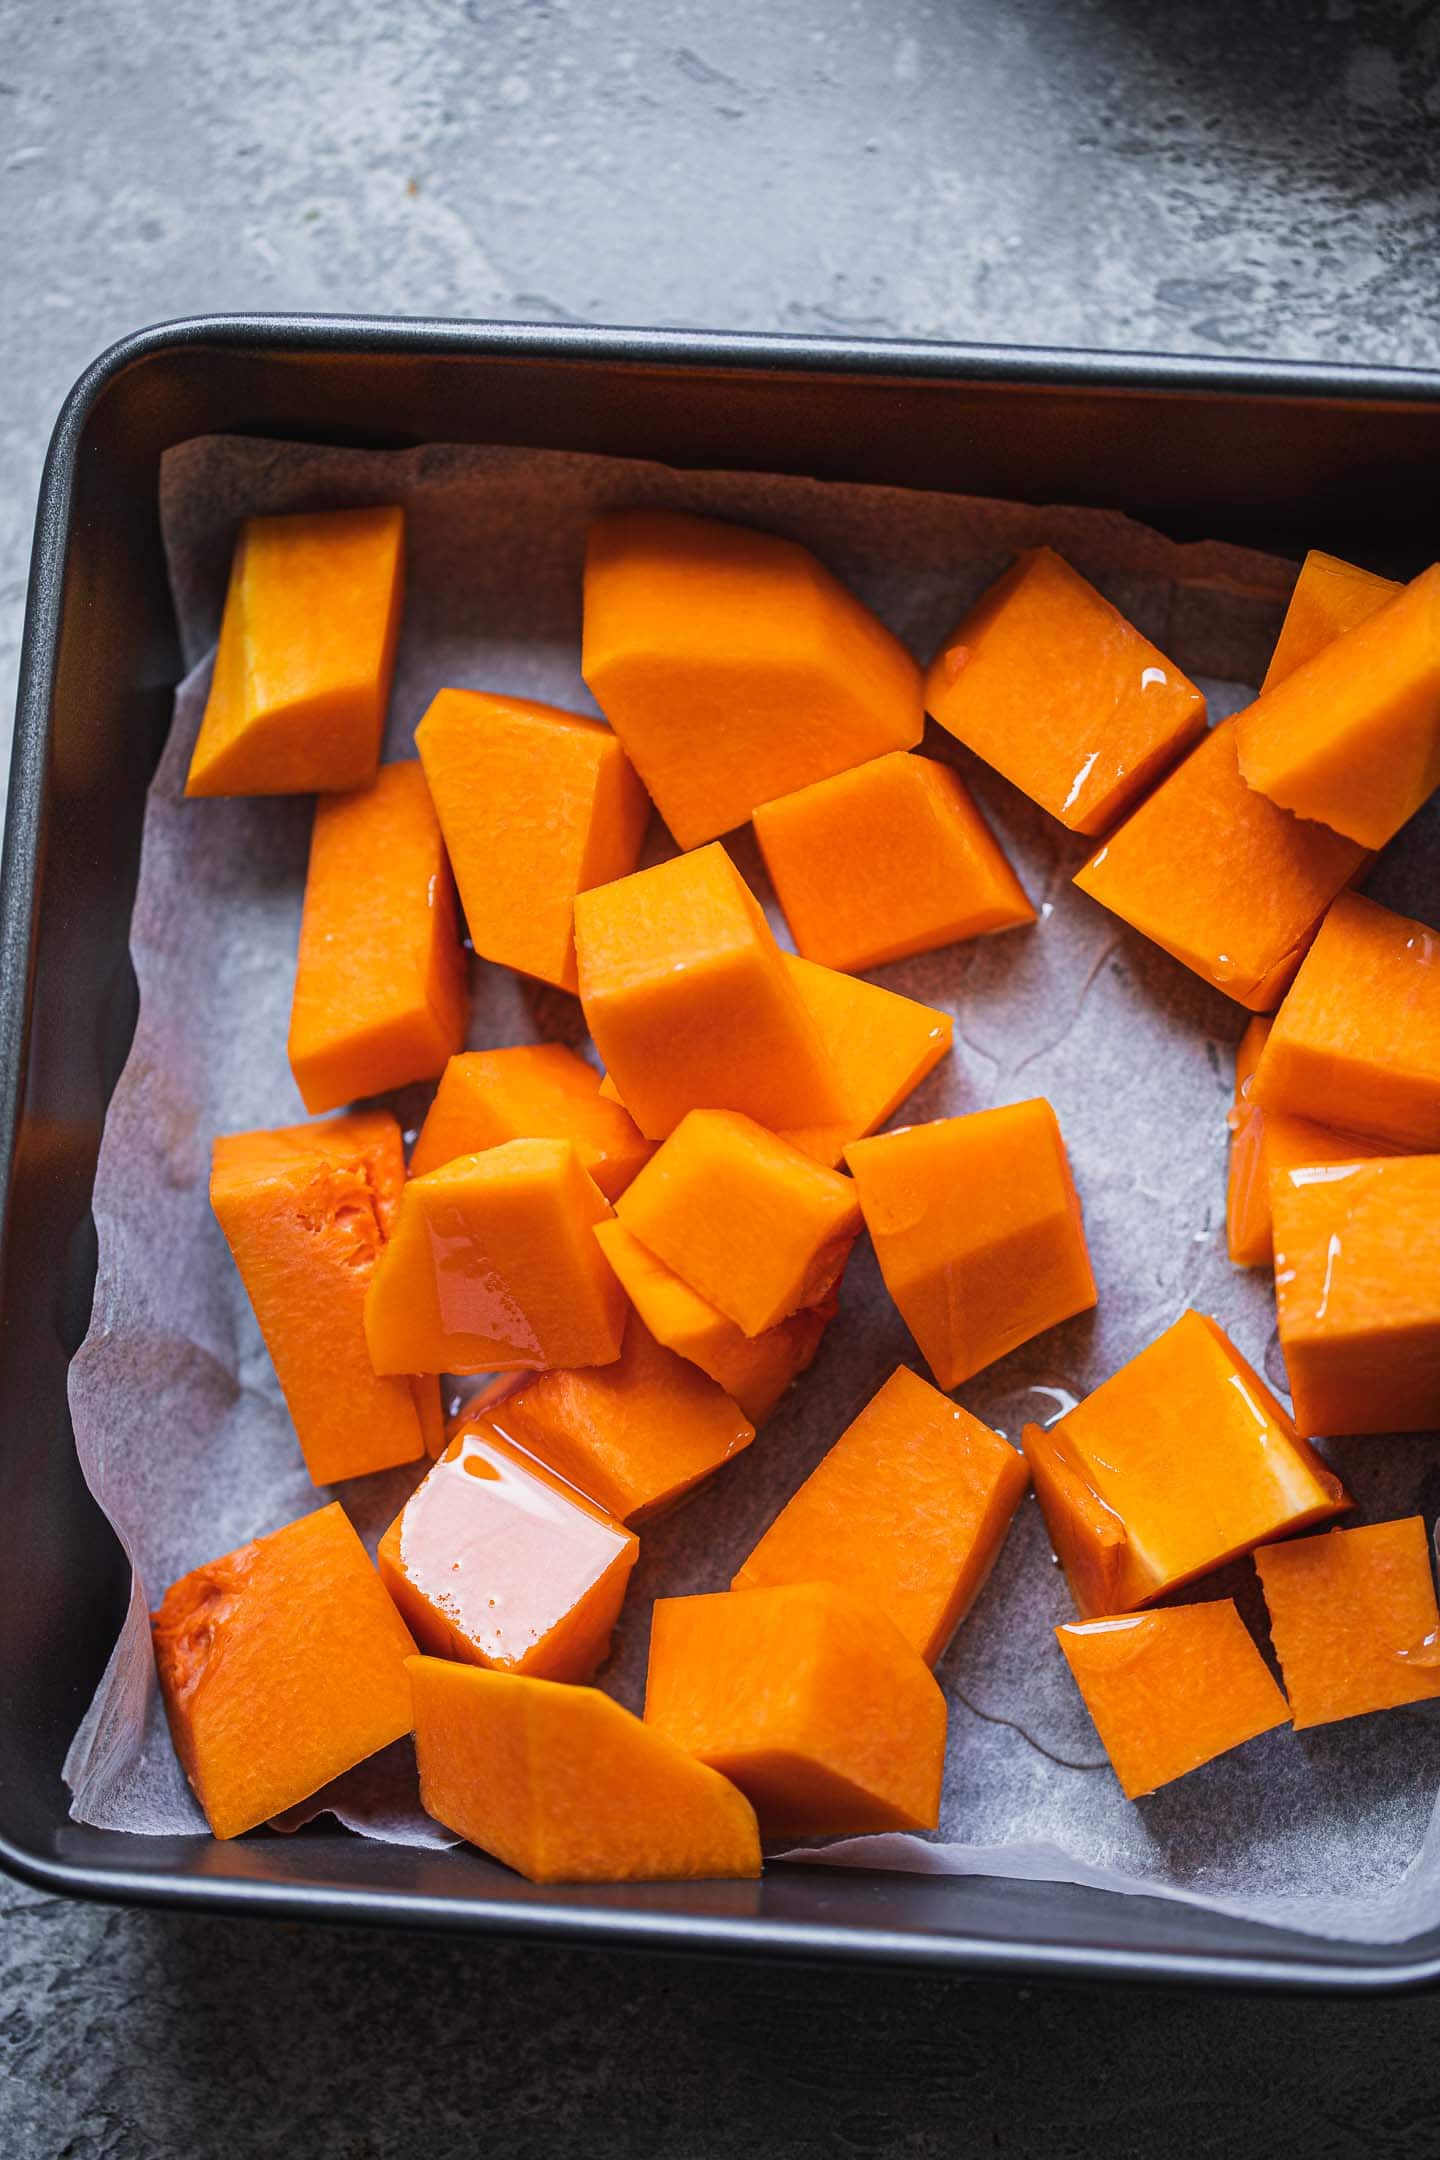 Butternut squash on a baking tray